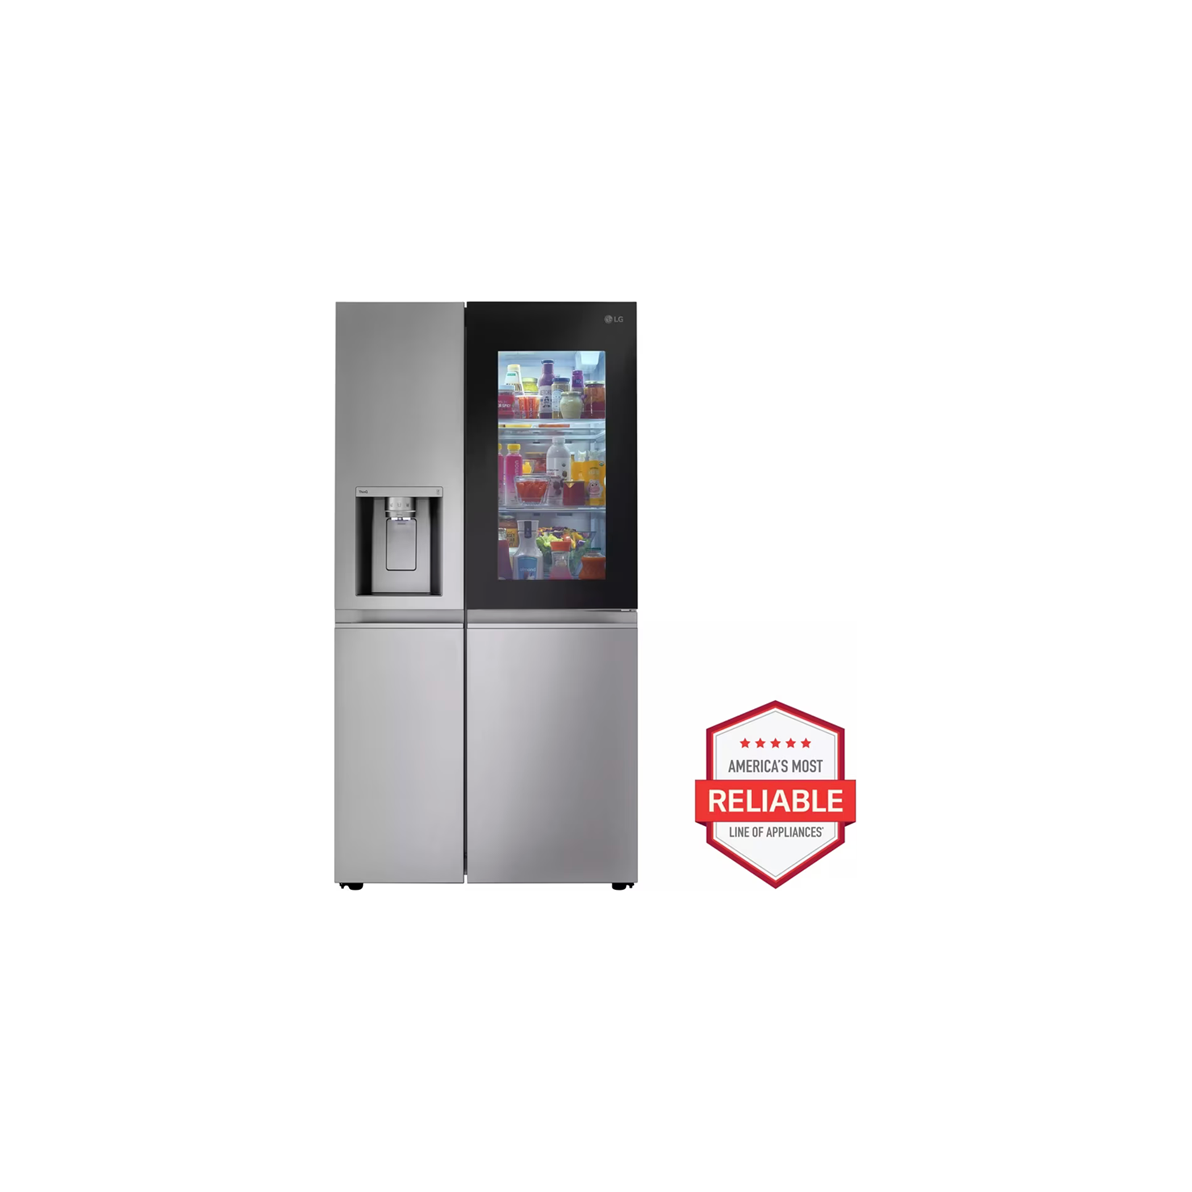 Refrigerador LG 27 Pies Instaview Side By Side Silver